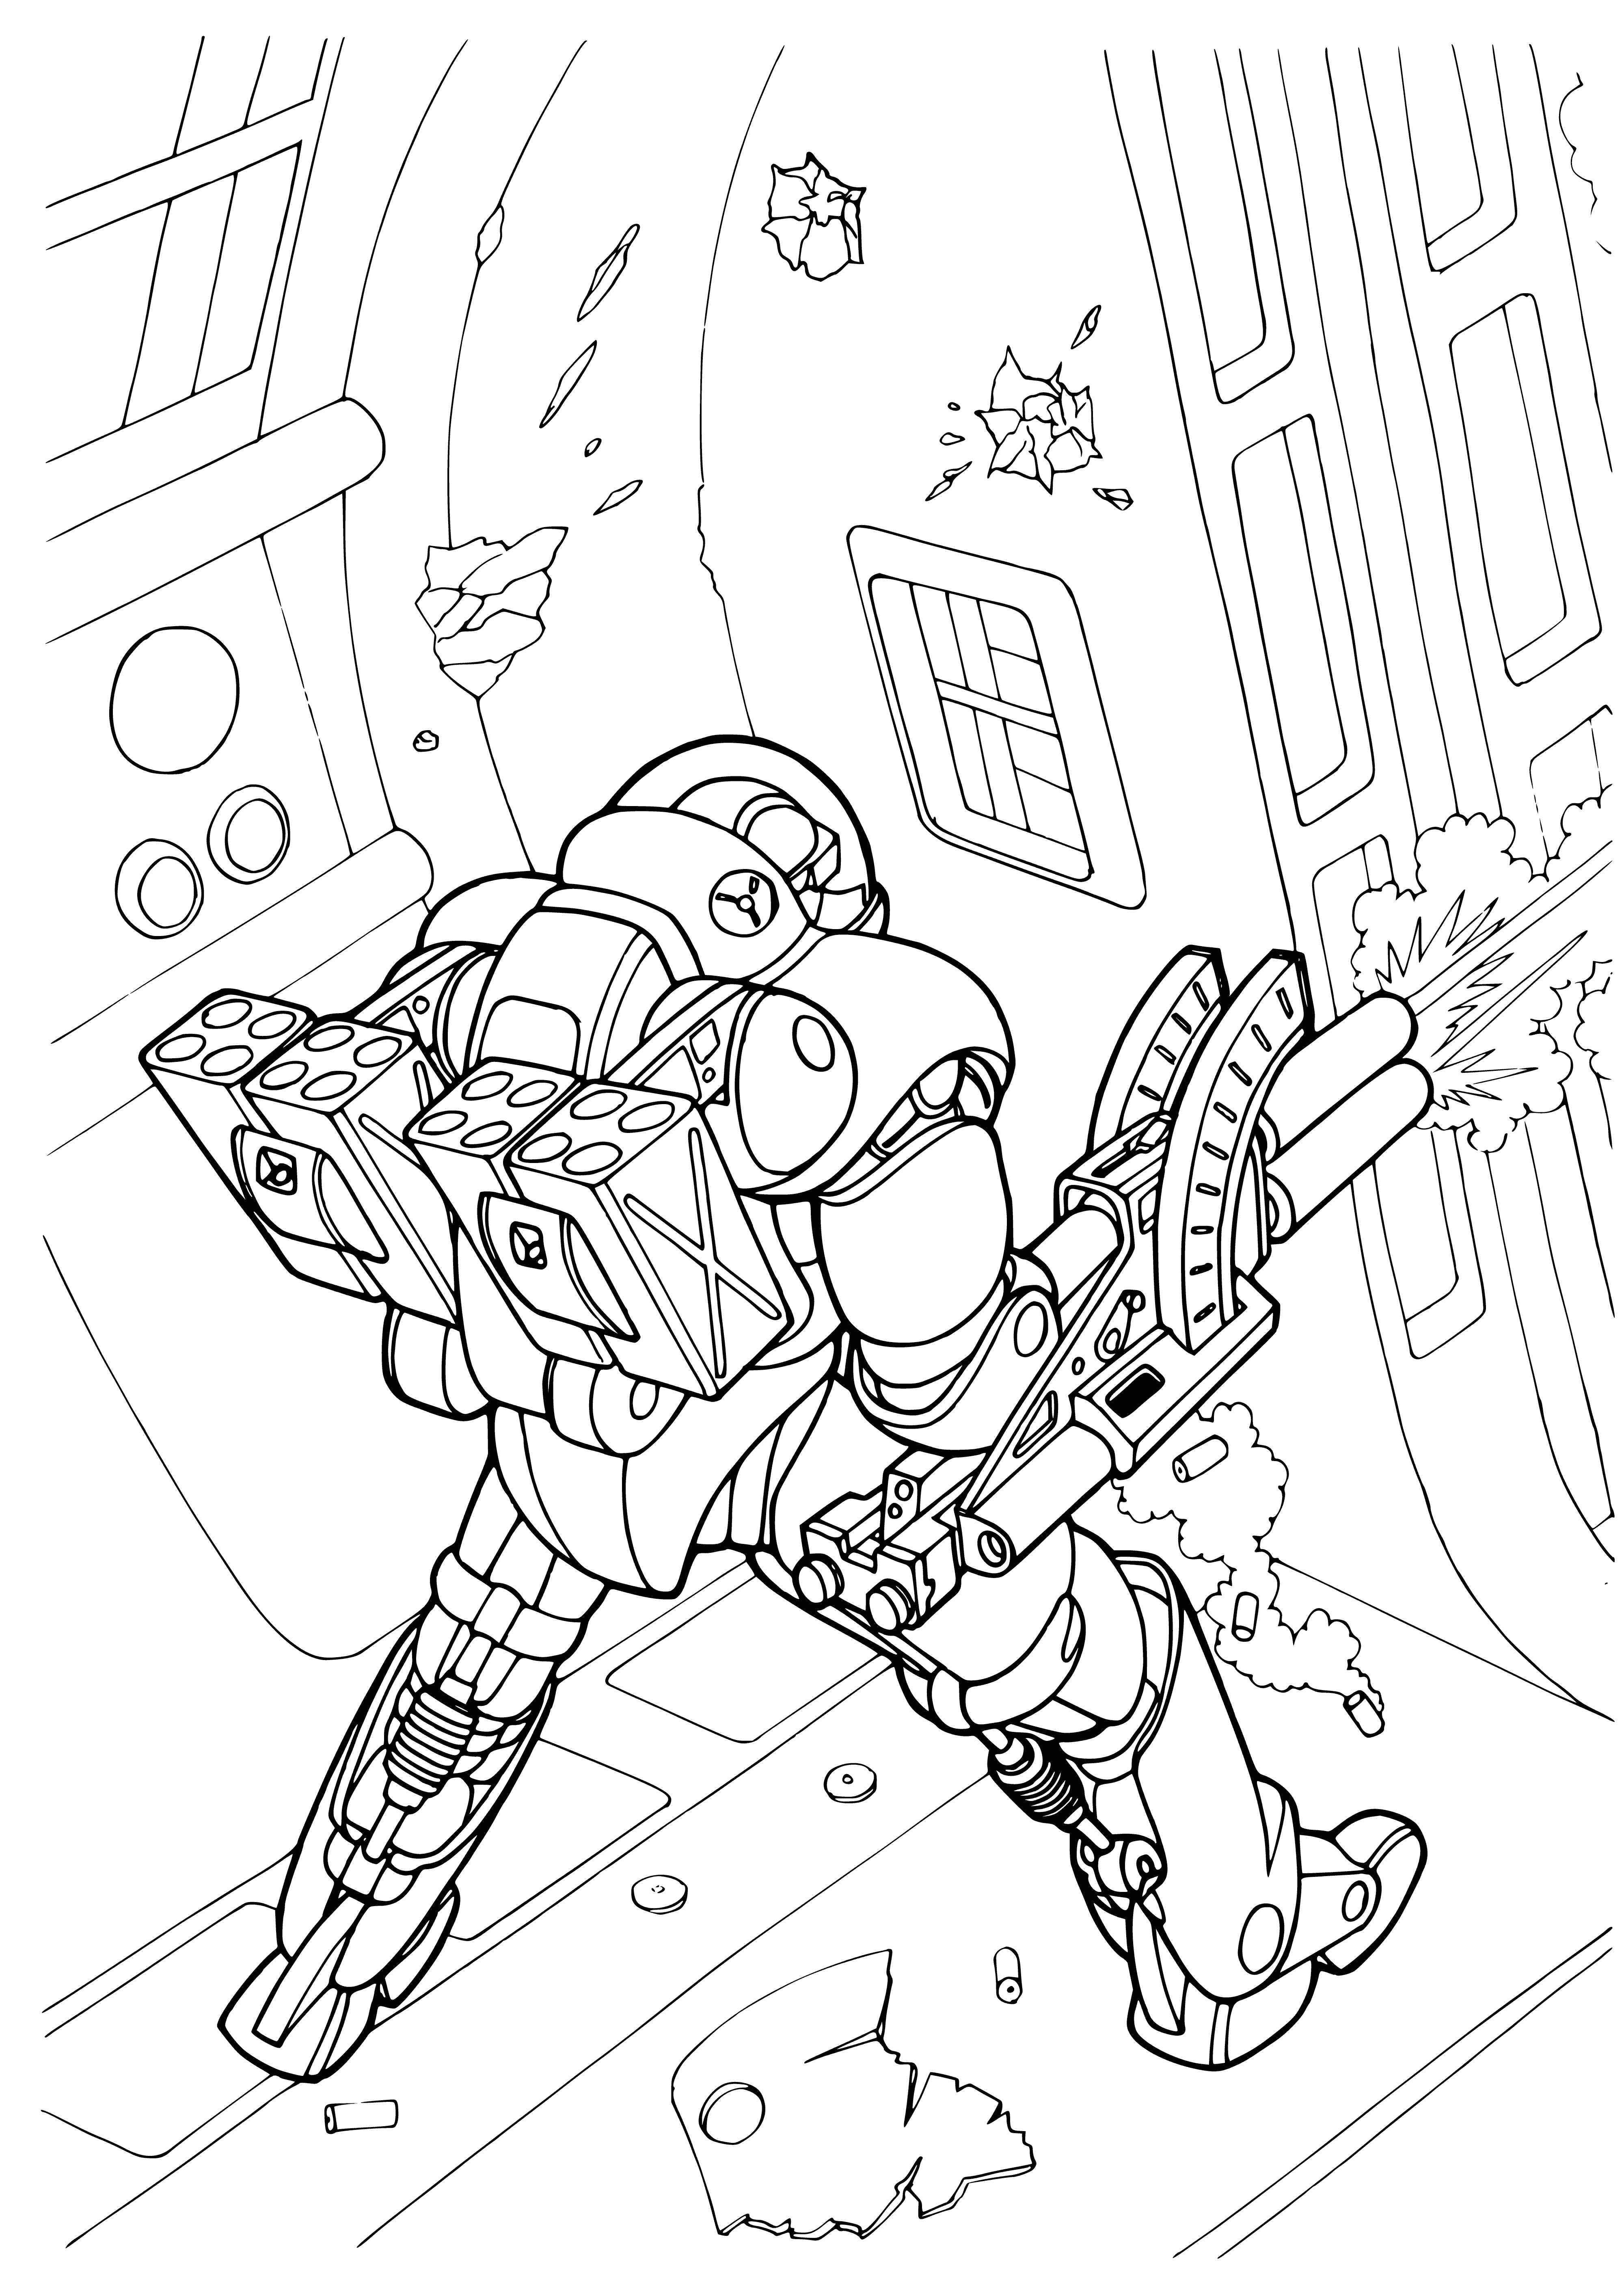 Man in a spacesuit coloring page